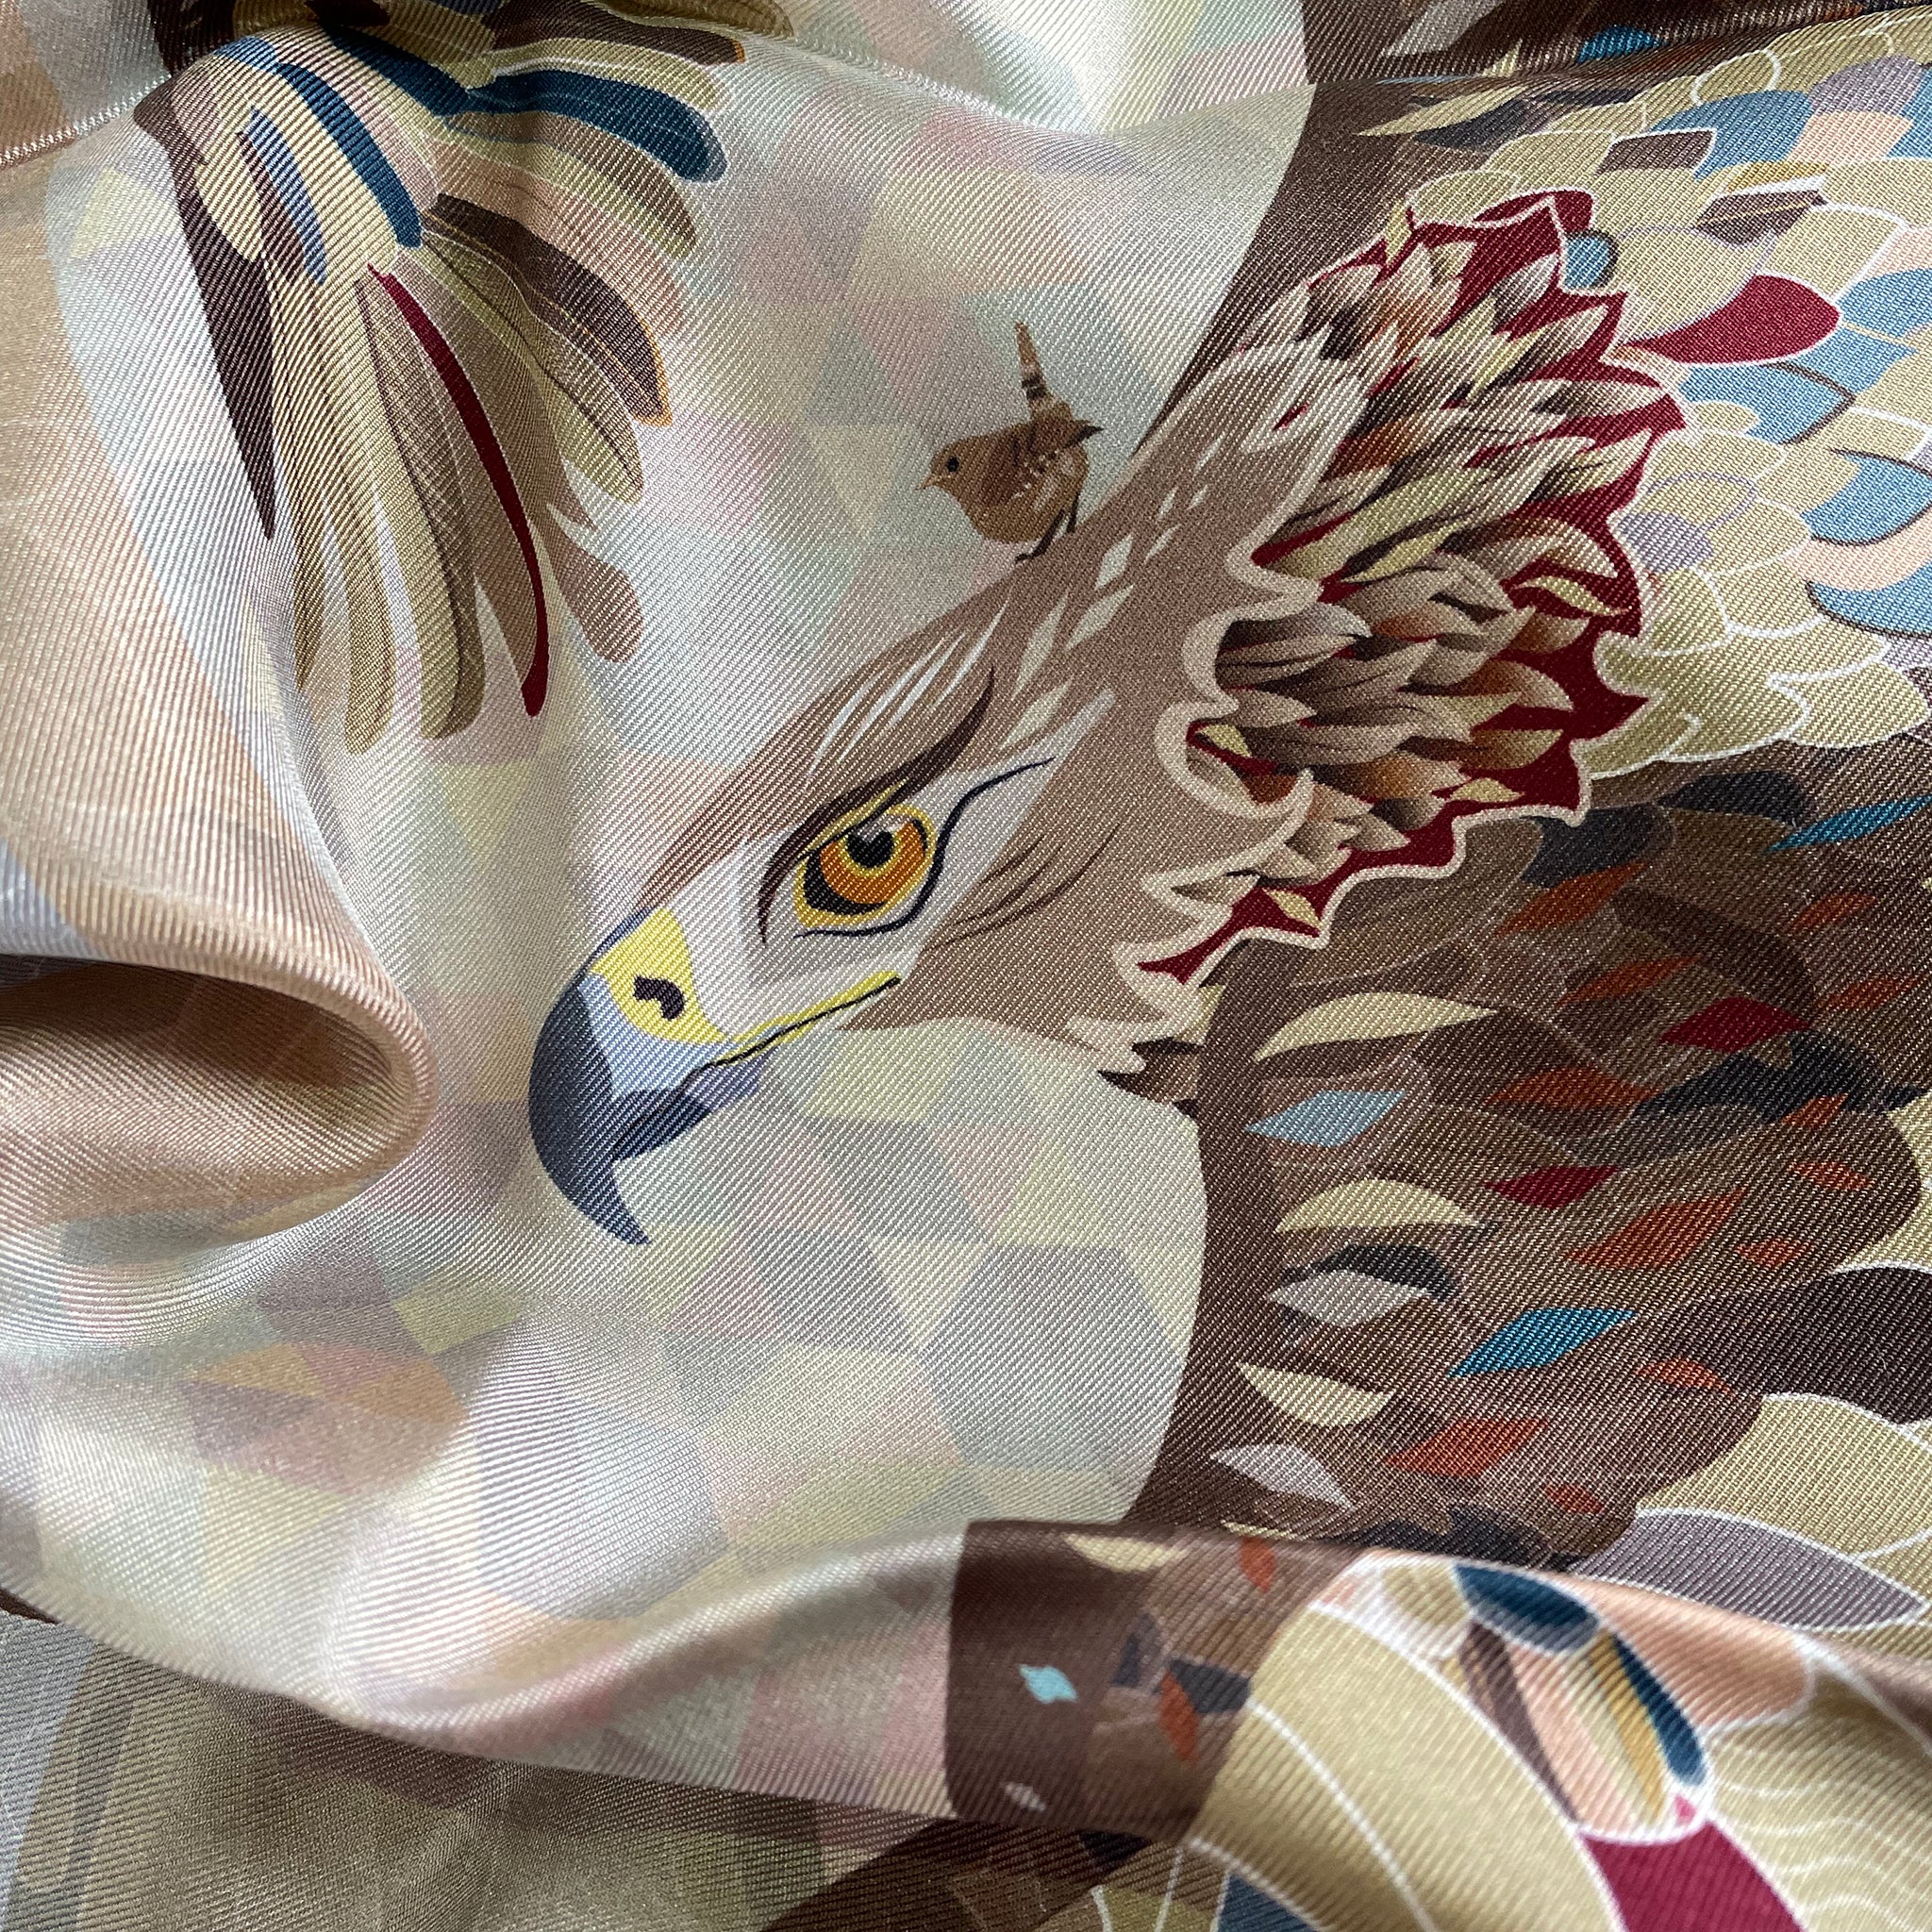  A detail from our Eagle & Wren silk scarf design inspired by and created in the Scottish Highlands and perfect for a special present.